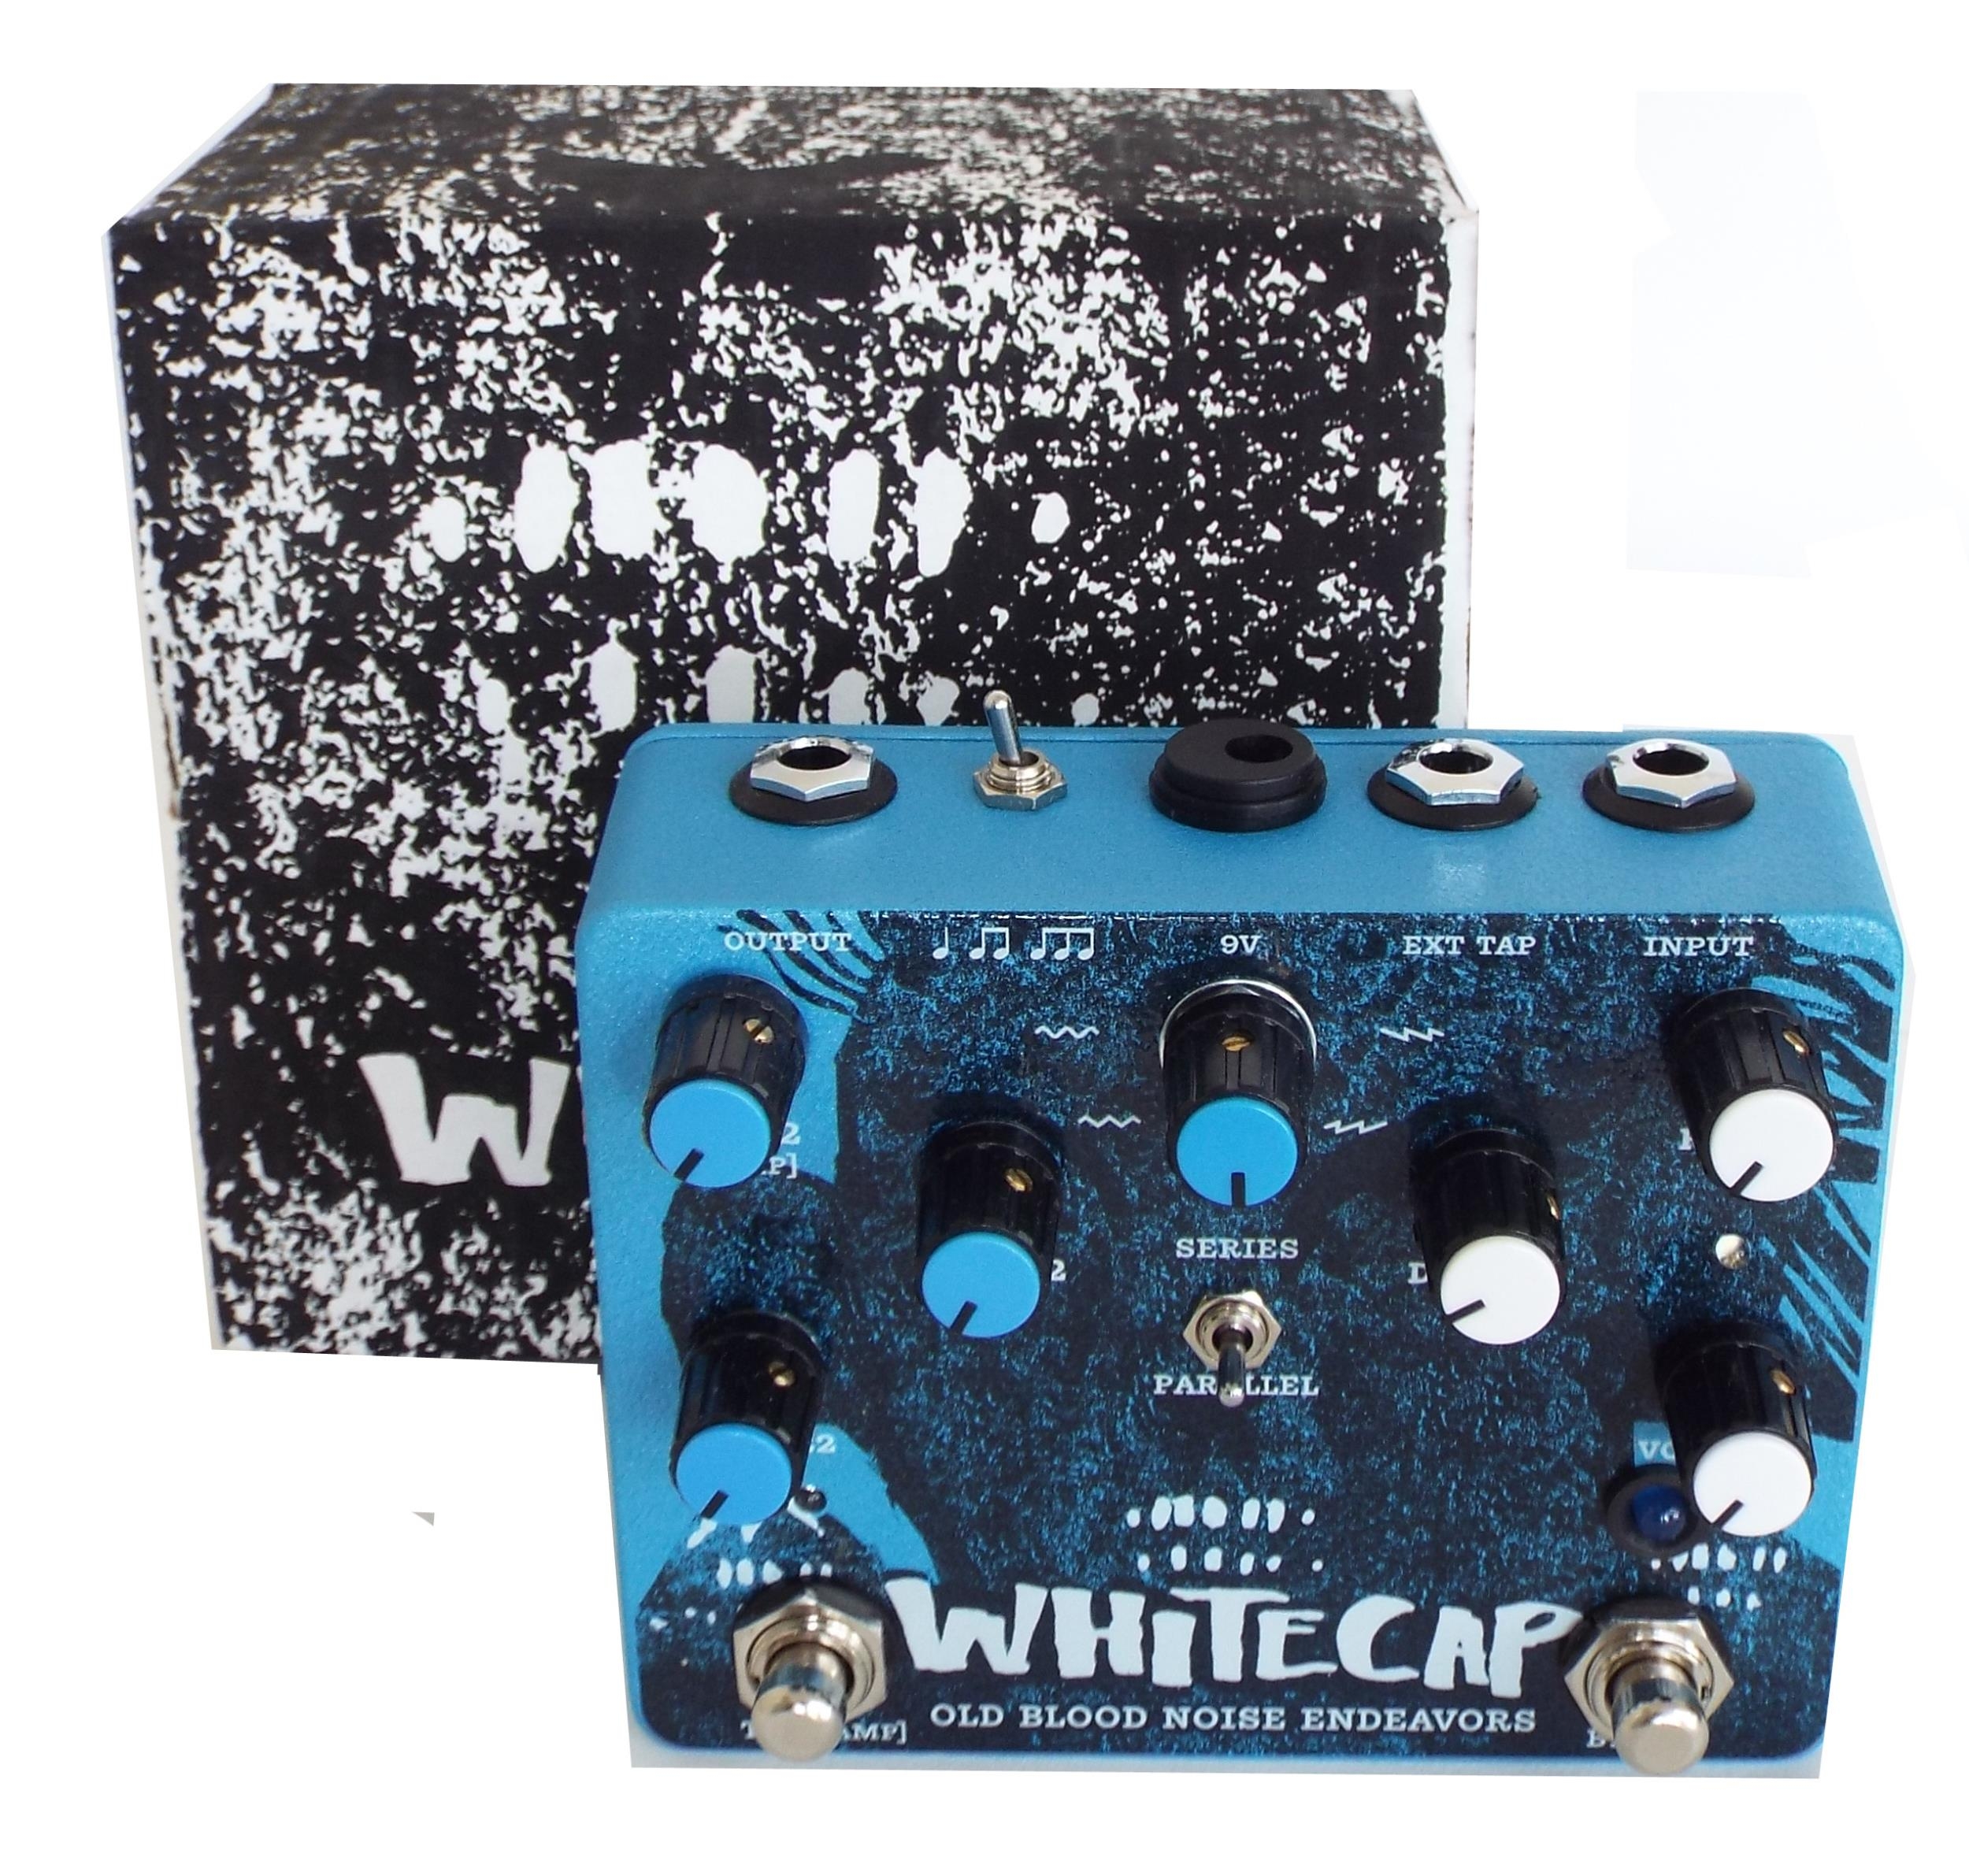 New and boxed - Old Blood Noise Endeavors White Cap guitar pedal